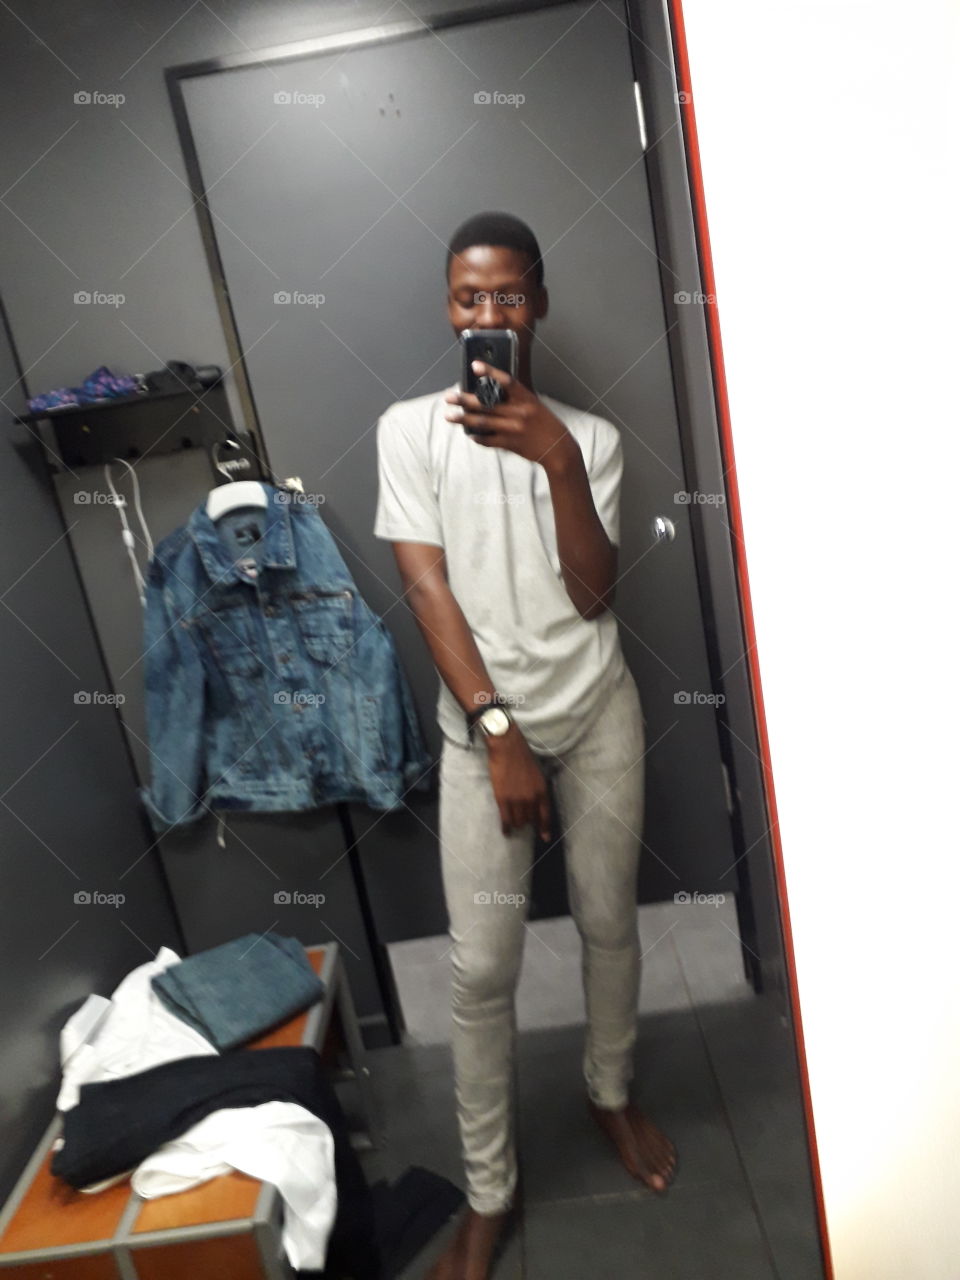 carried away in the fitting room